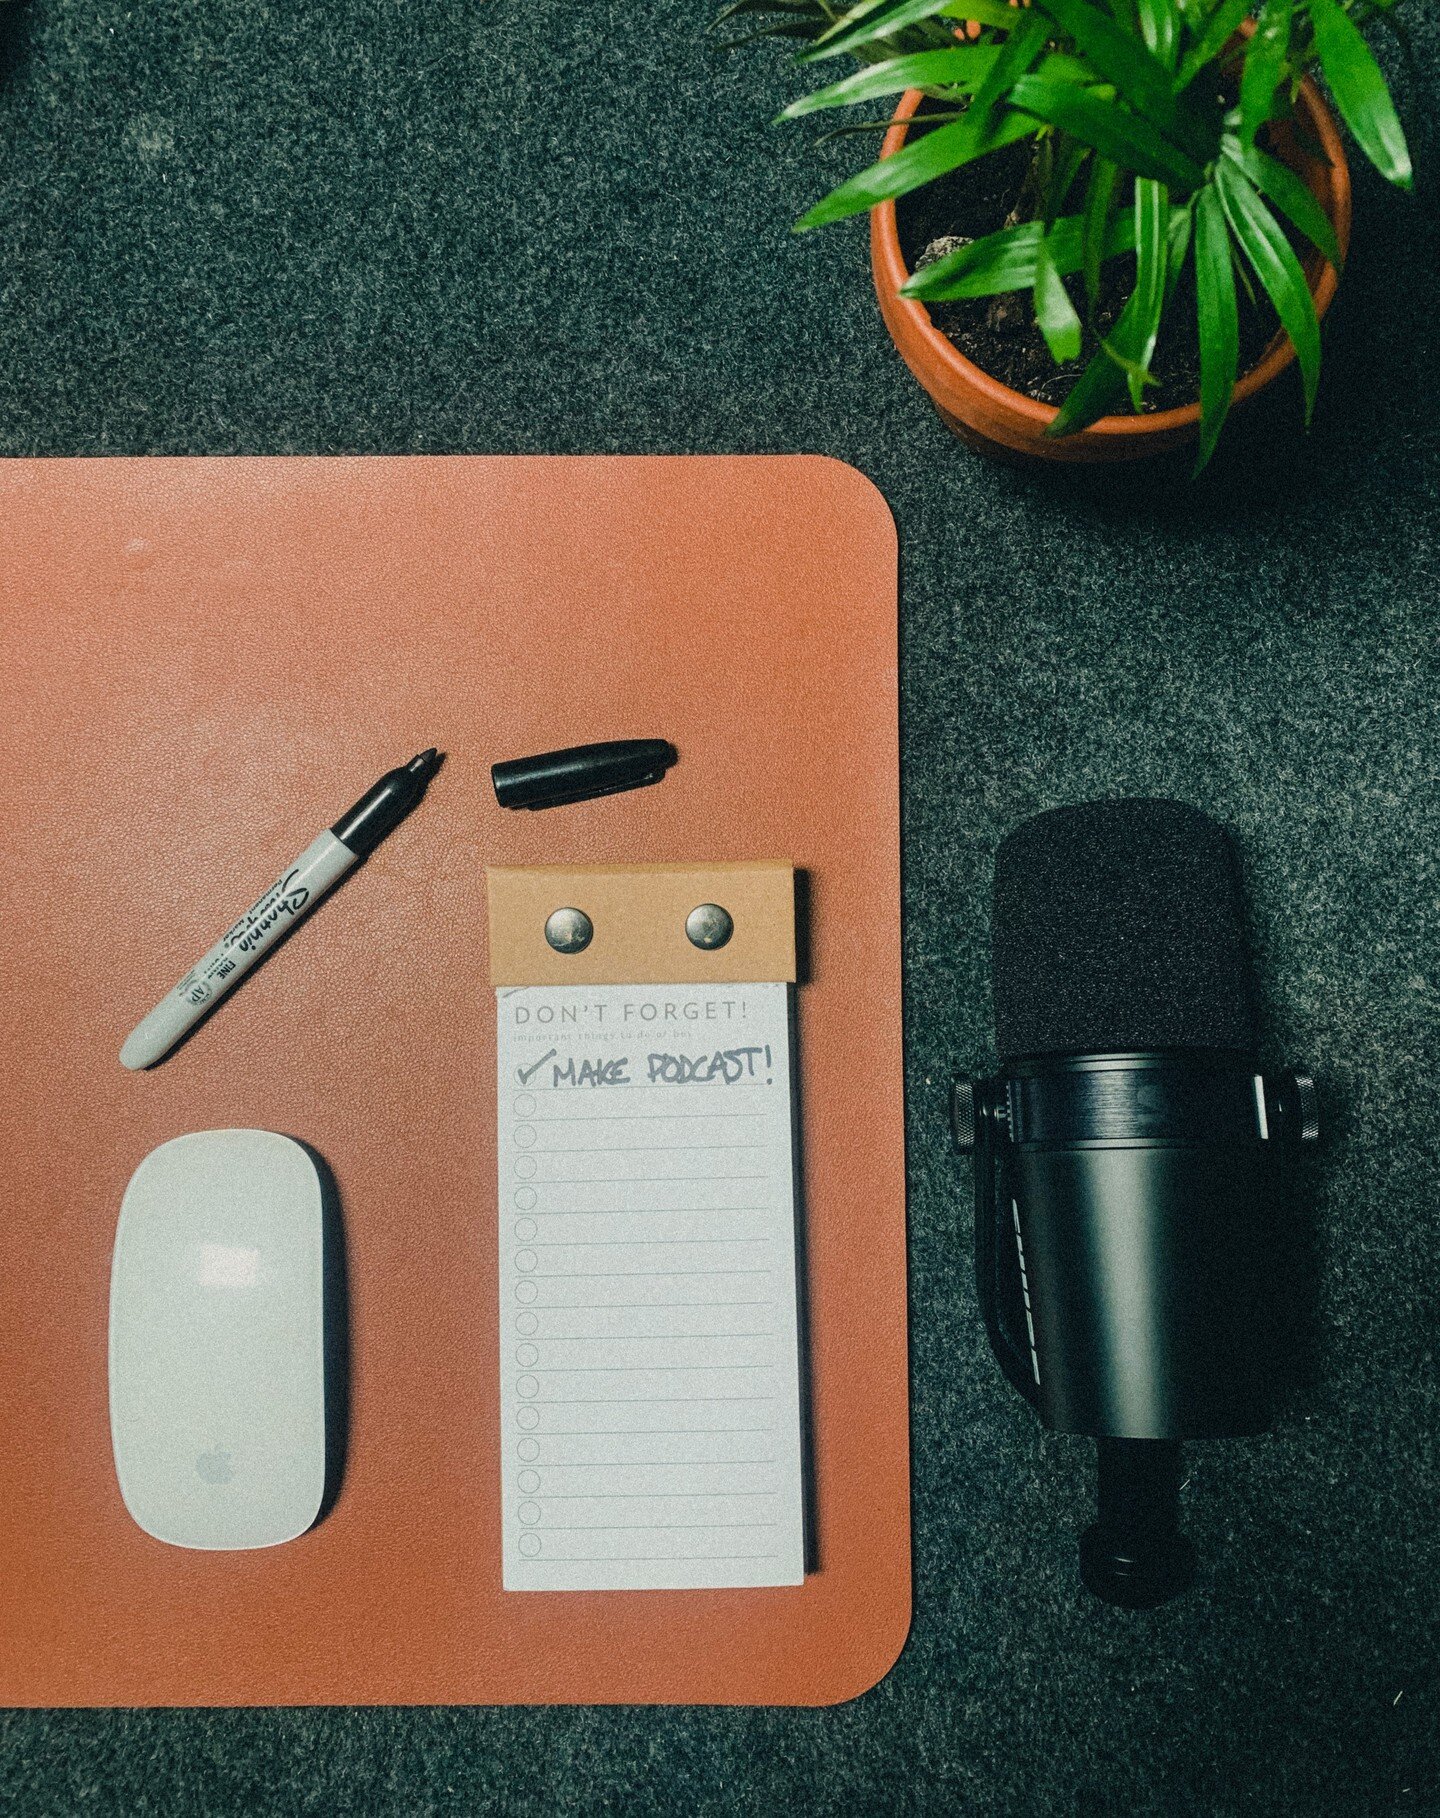 Make 2022 the year of getting stuff done. Go on you've got this, I believe in you.
-
-
#getstuffdone #video #reels #podcast #videoproduction #videoproductioncompany #flatlay #iphonephotography #shure #shuremicrophones #plants #plantsofinstagram #plan